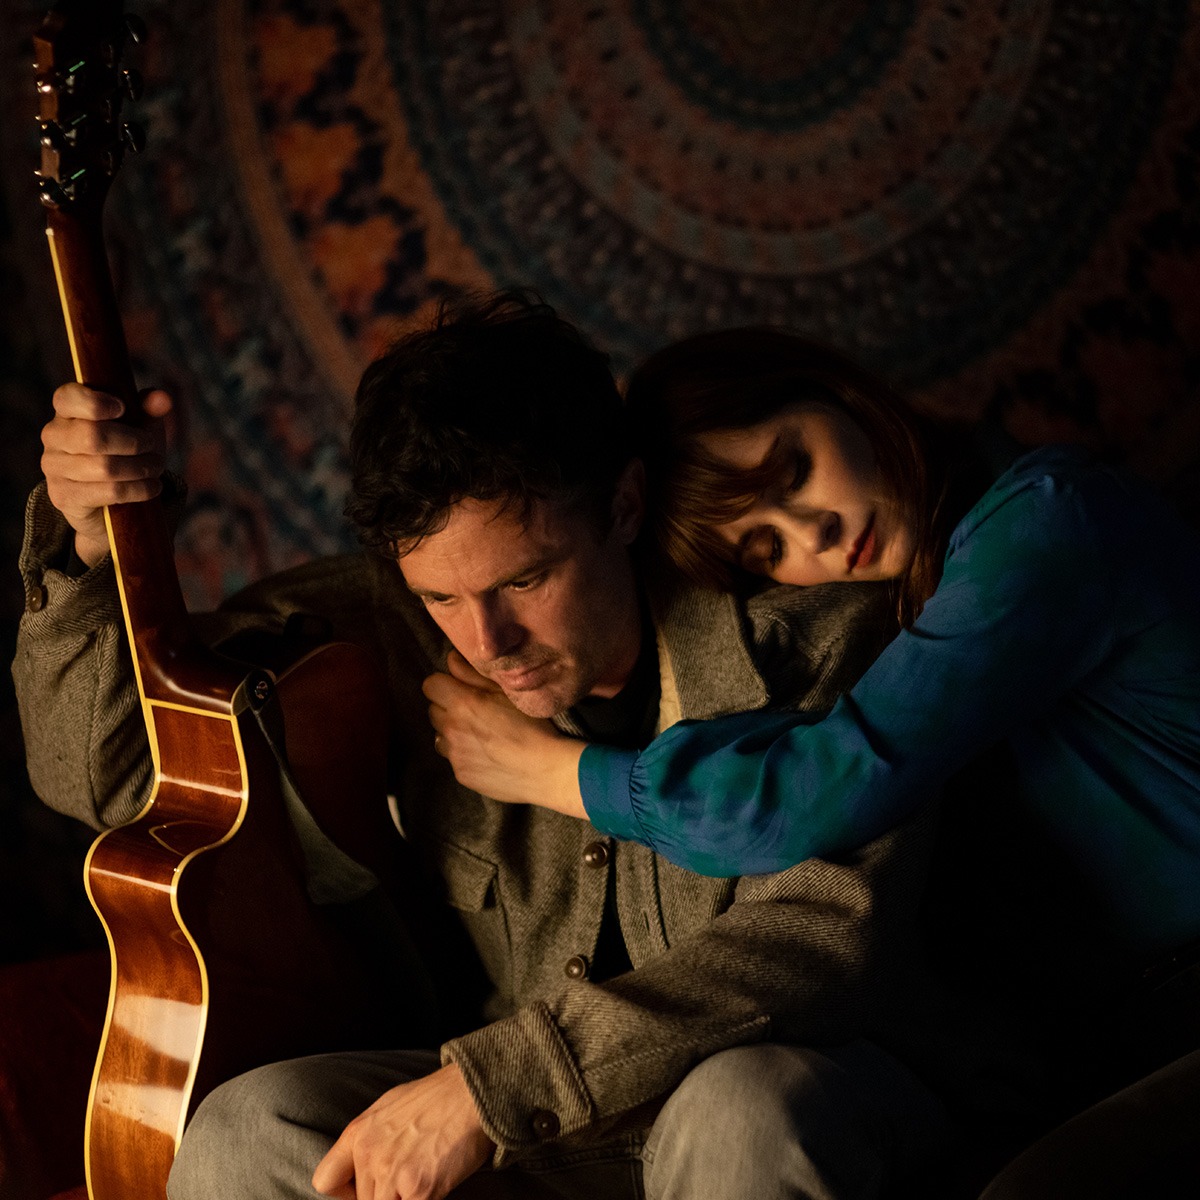 a woman leaning on the shoulder of a man holding a guitar sit on a couch.